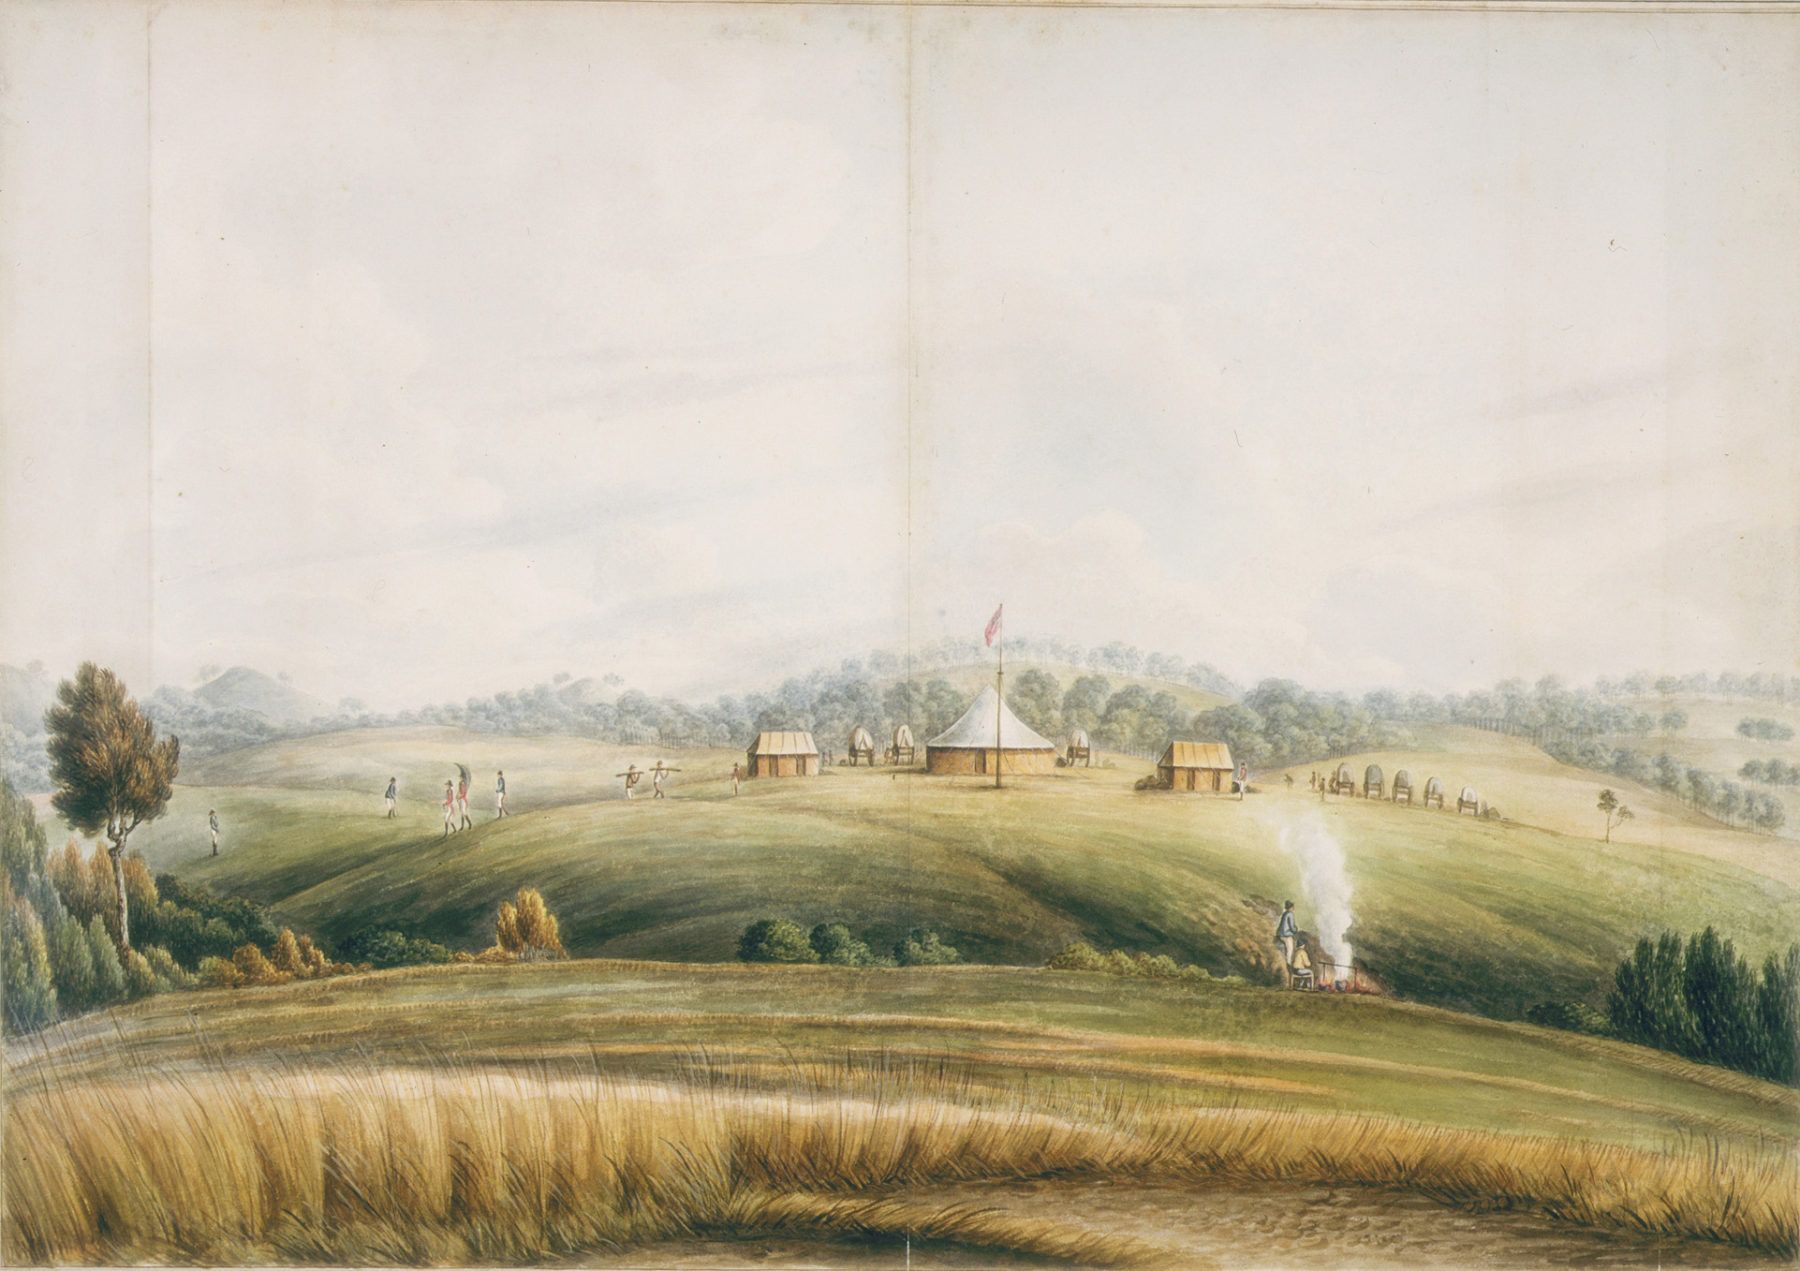 View across cultivated landscape with smoke and farm buildings in distance.